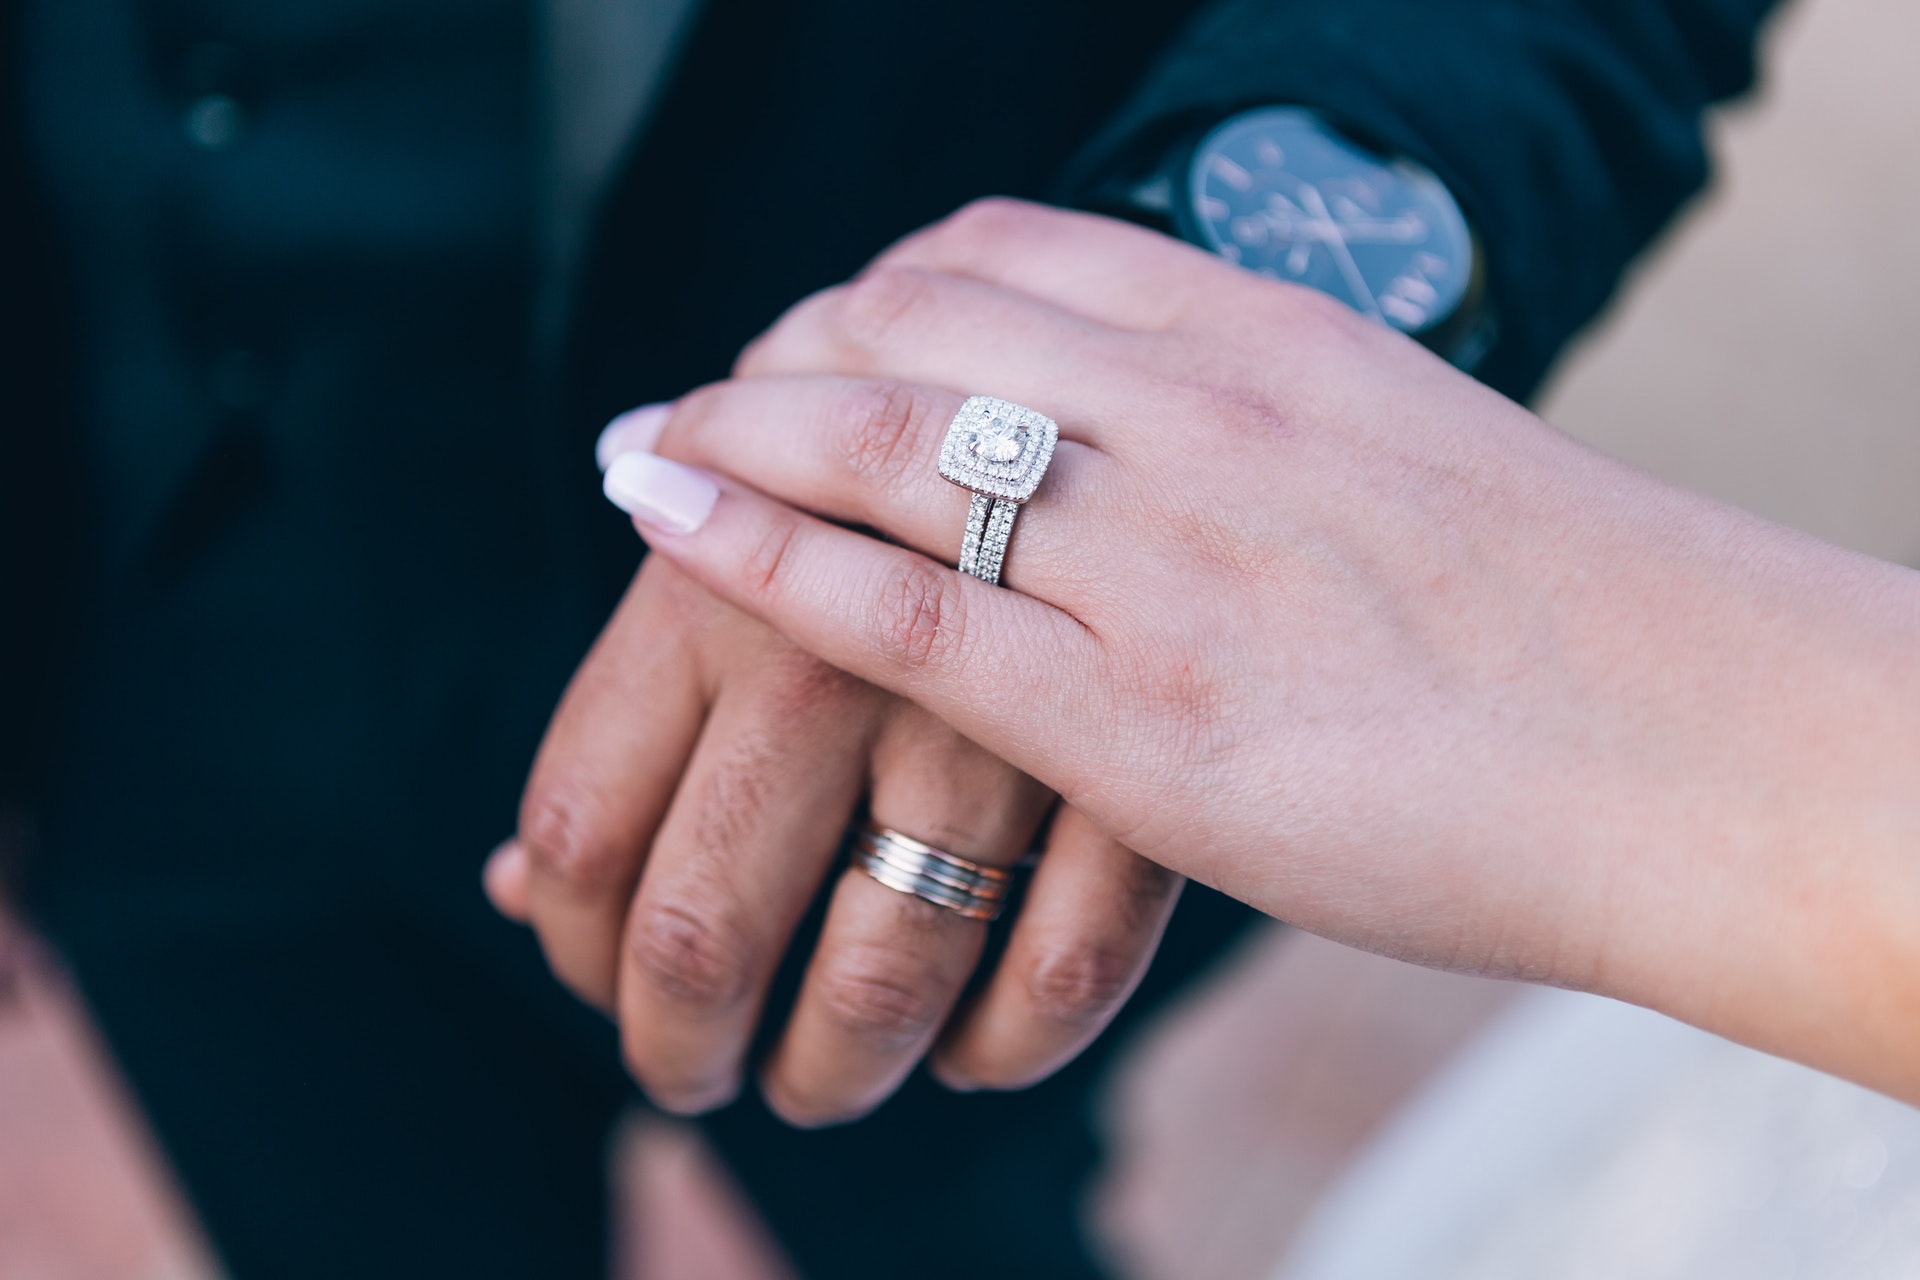 How to clean wedding and engagement rings at home - expert tips